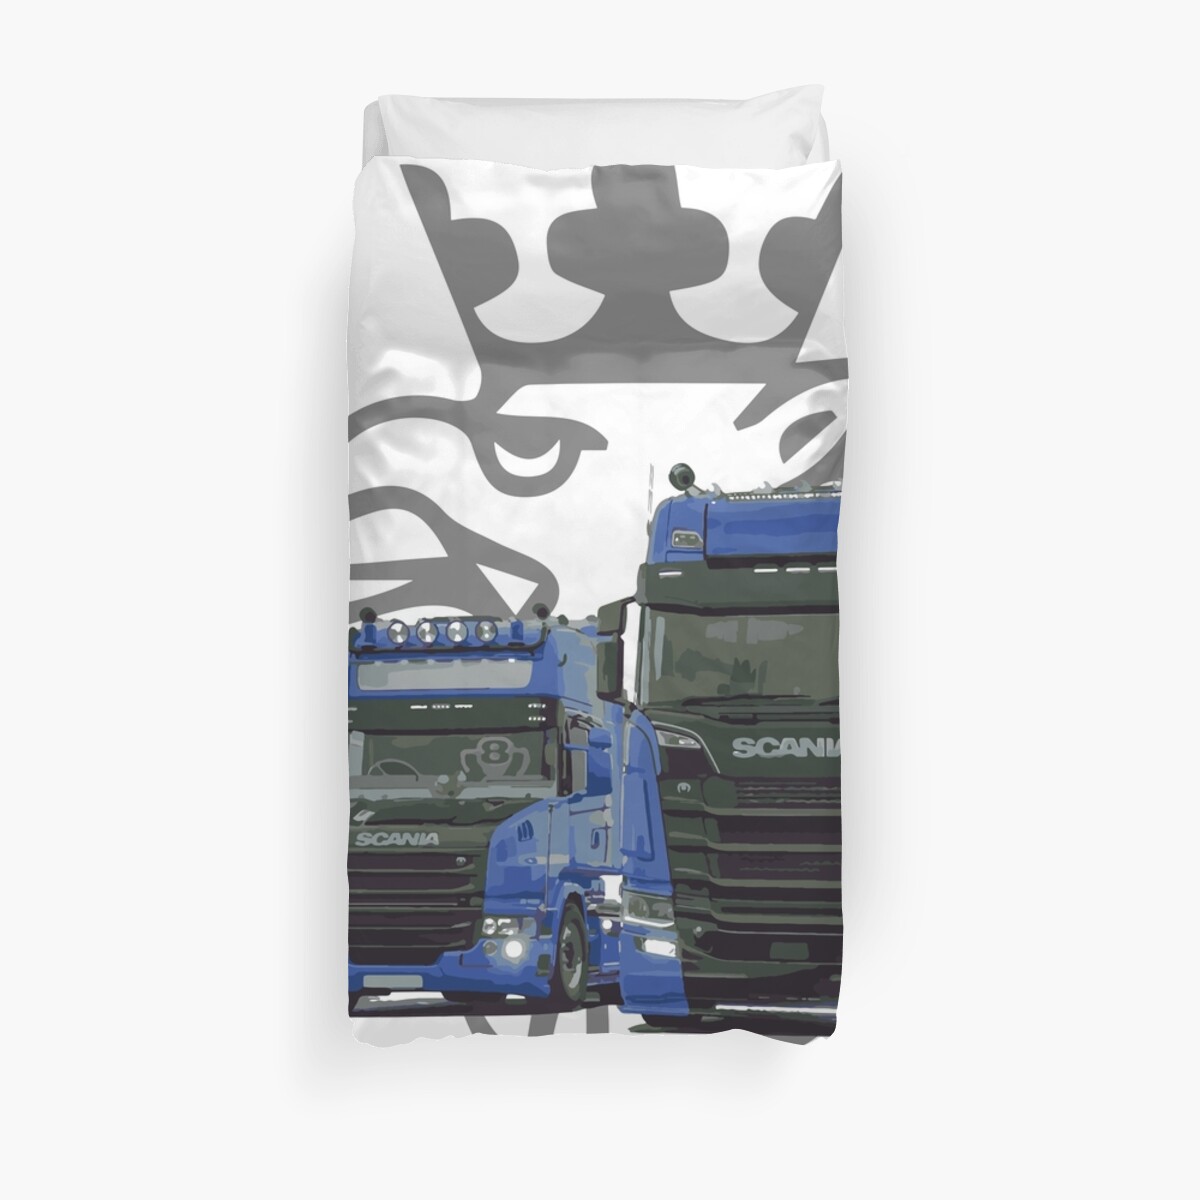 Scania S580 Scania T580 Hail To The King Duvet Cover By